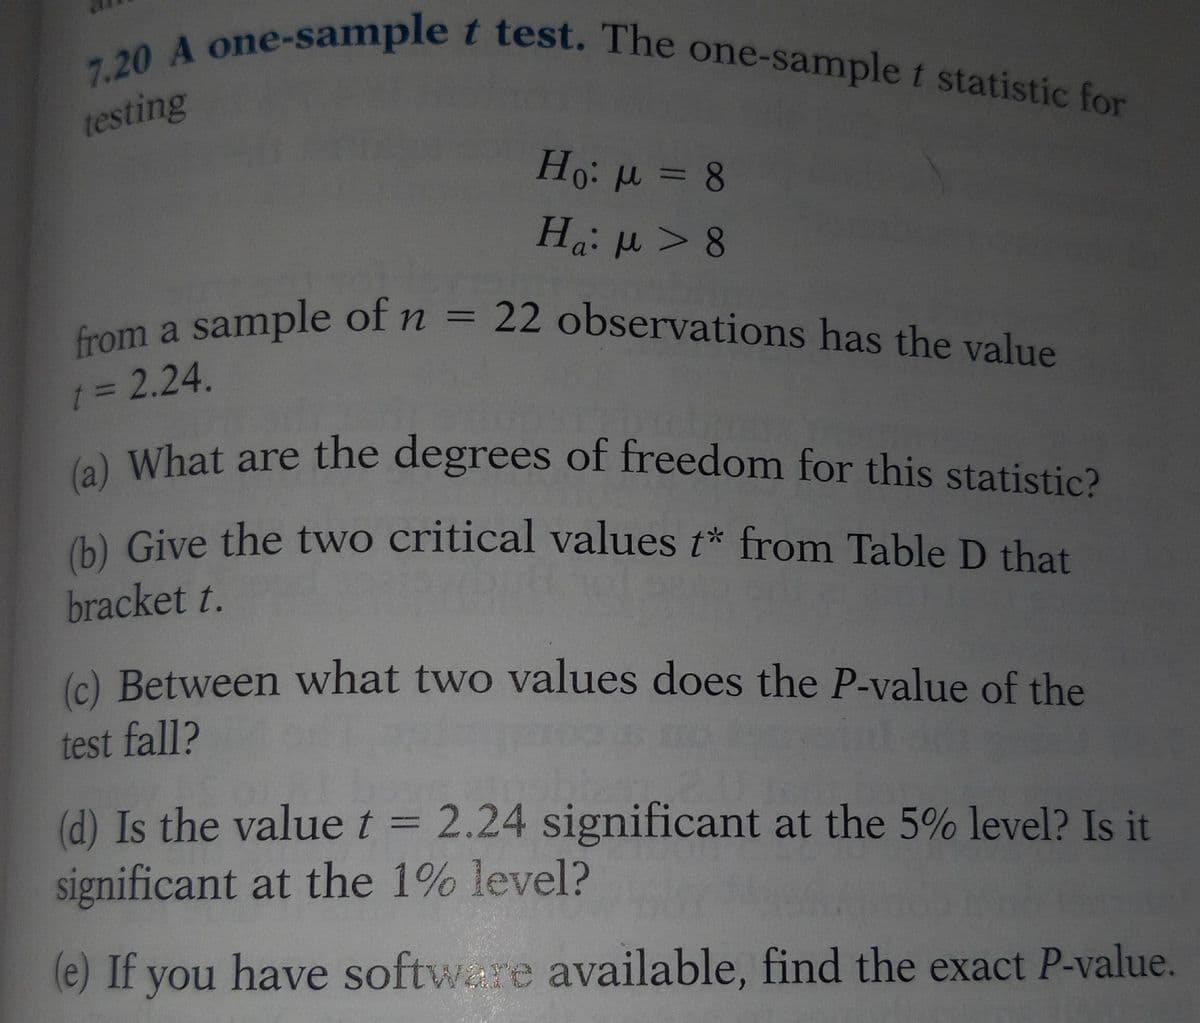 7.20 A one-sample t test. The one-sample t statistic for
testing
Ho: μ = 8
Ha: μ > 8
from a sample of n = 22 observations has the value
t = 2.24.
(a) What are the degrees of freedom for this statistic?
(b) Give the two critical values t* from Table D that
bracket t.
(c) Between what two values does the P-value of the
test fall?
(d) Is the value t = 2.24 significant at the 5% level? Is it
significant at the 1% level?
(e) If you have software available, find the exact P-value.